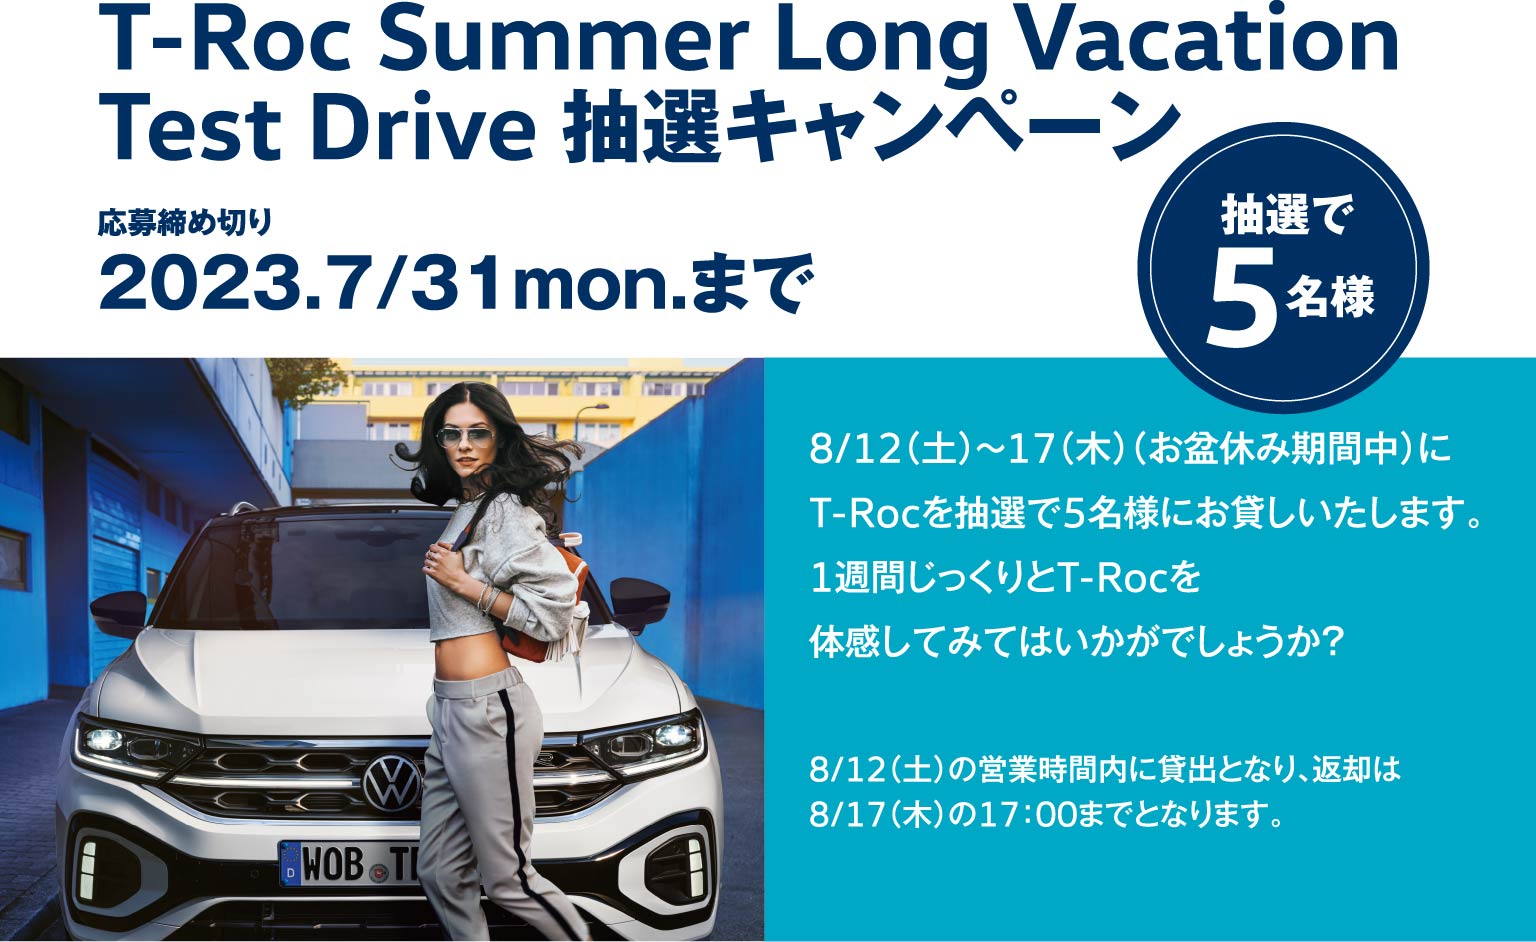 T-Roc Summer Long VacationTest Drive 抽選キャンペーン